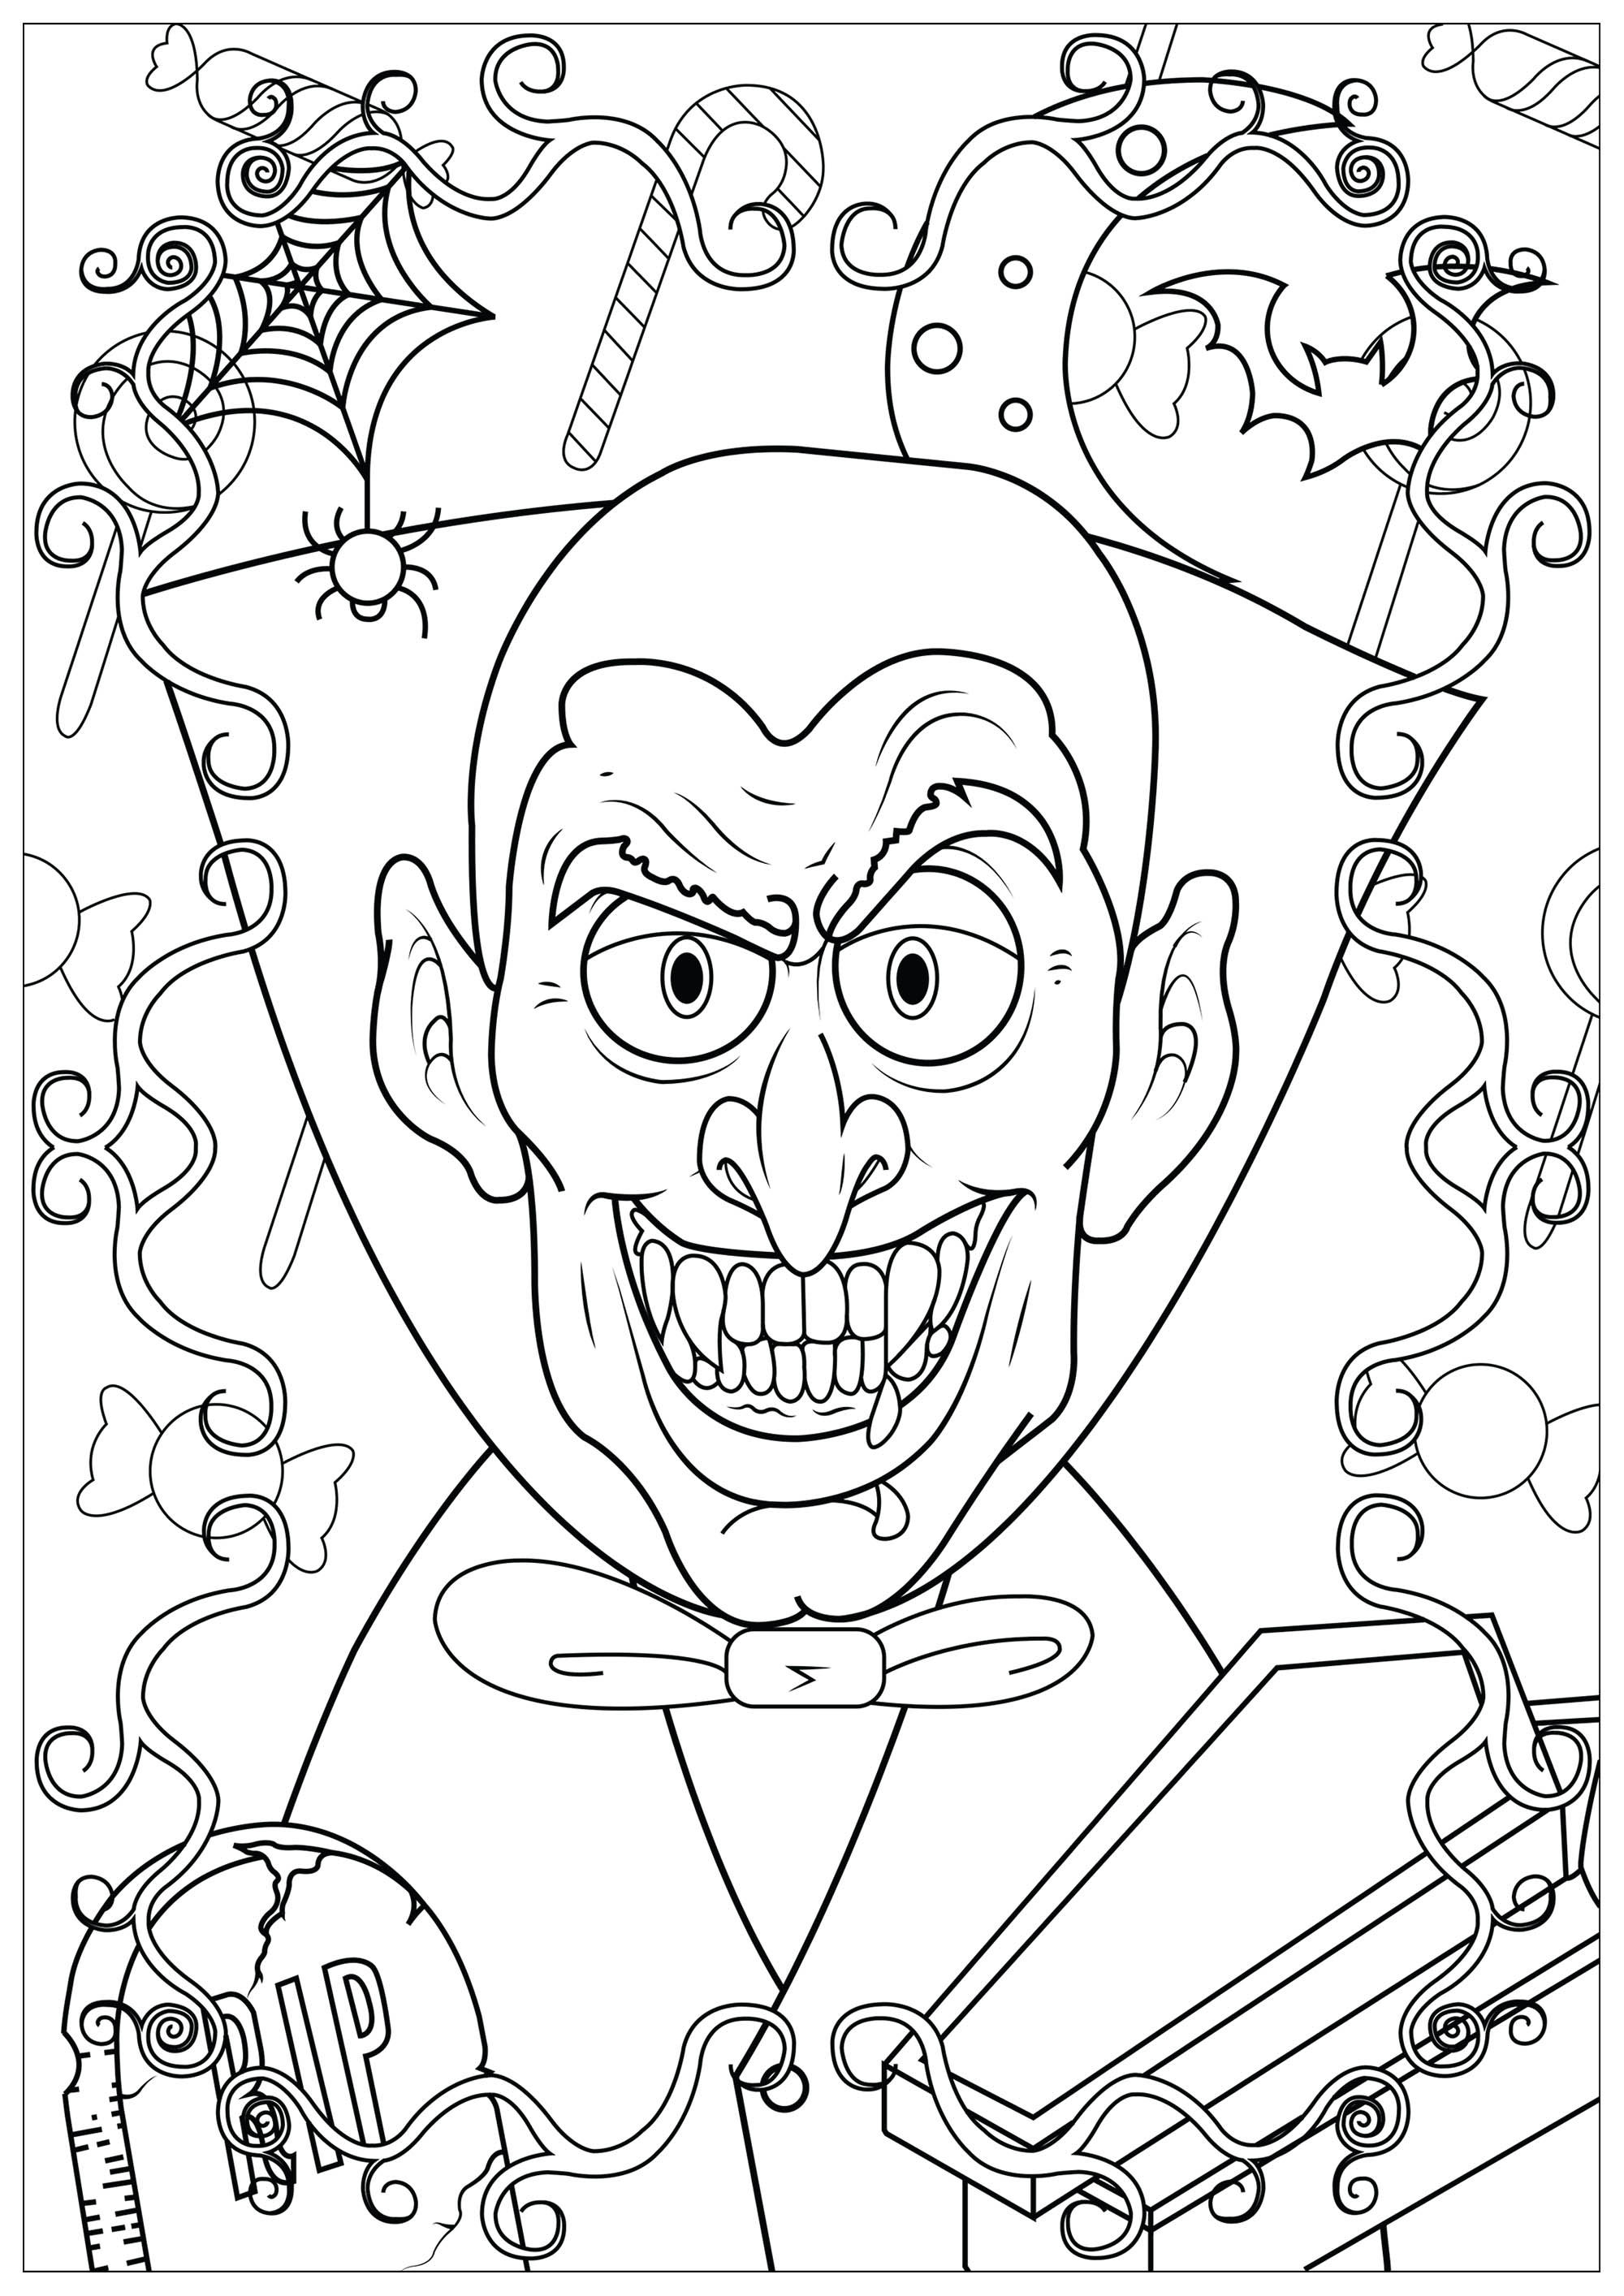 A vampire with sharp teeth. This coloring page is perfect to celebrate Halloween, if you like the world of vampires and especially Dracula.